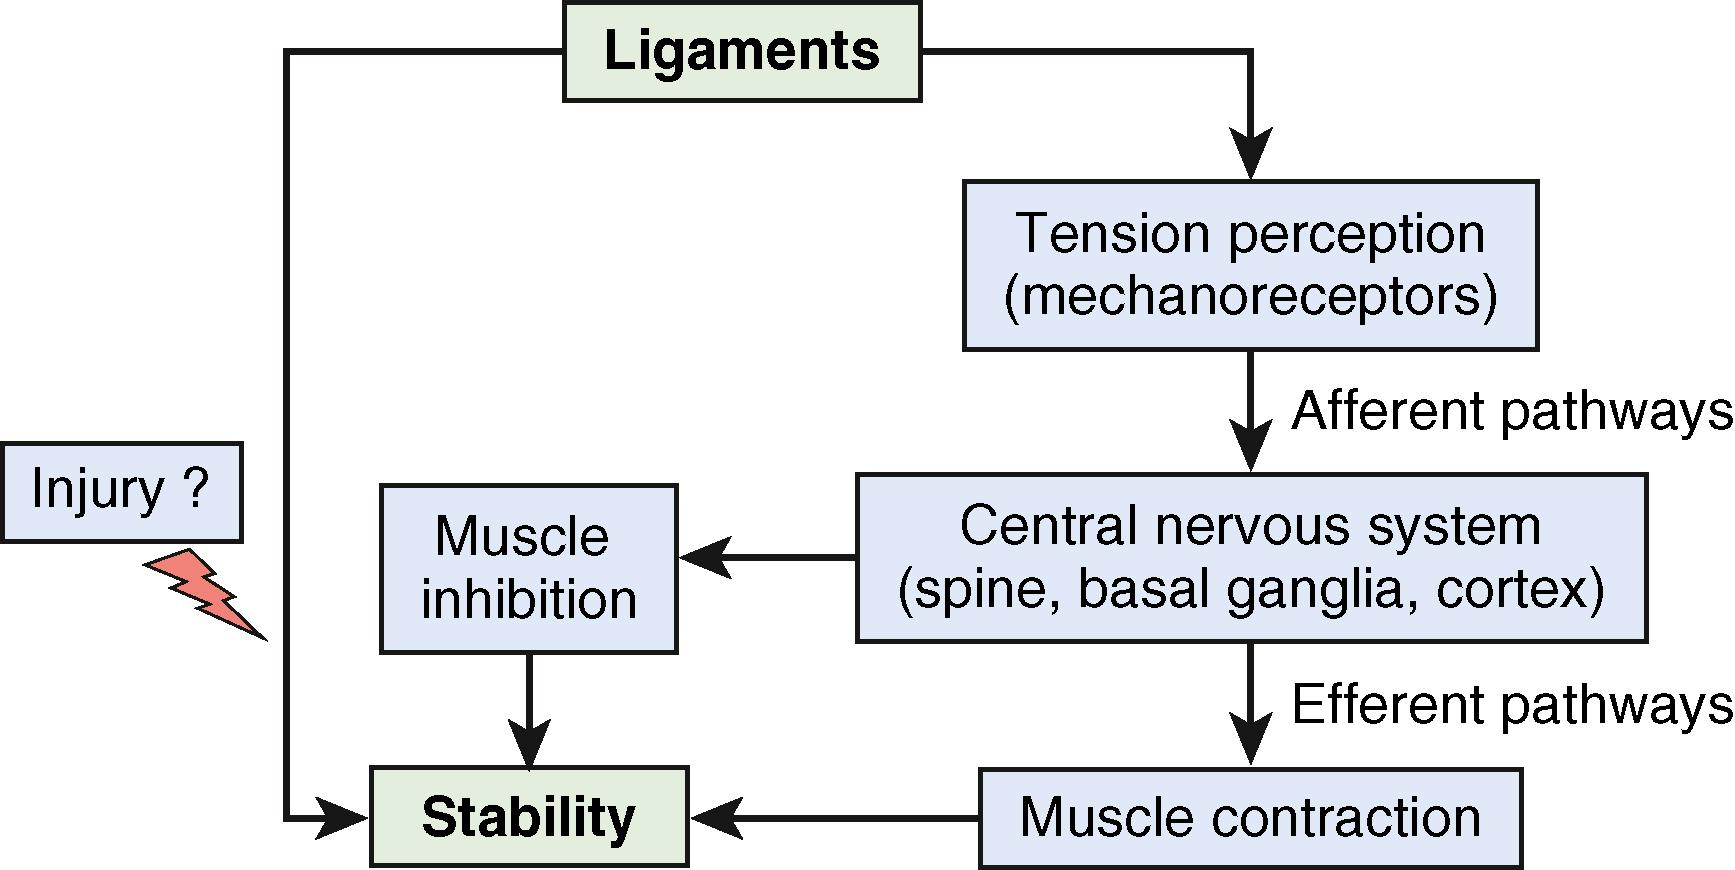 Fig. 13.12, Schematic representation of the mechanism of carpal stabilization. Ligaments are the primary stabilizers. When one ligament is seriously injured, a secondary neuromuscular reflex develops to compensate for the defect. This entire mechanism is mediated by the central nervous system and, depending on which ligament is injured, involves contraction of some muscles and inhibition of other muscles.